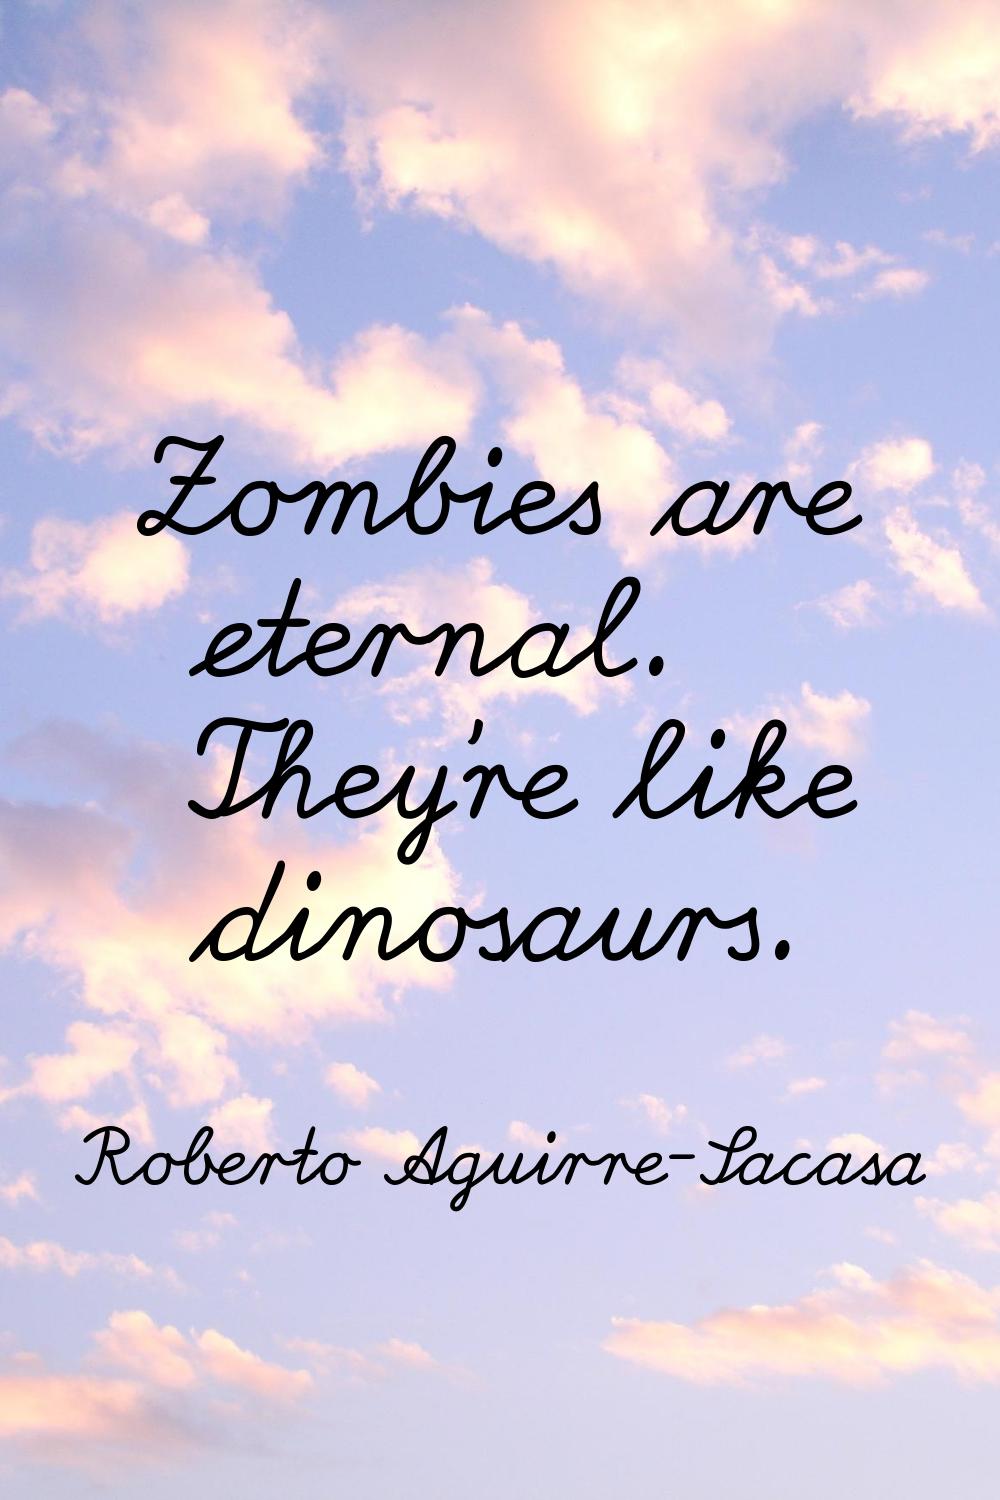 Zombies are eternal. They're like dinosaurs.